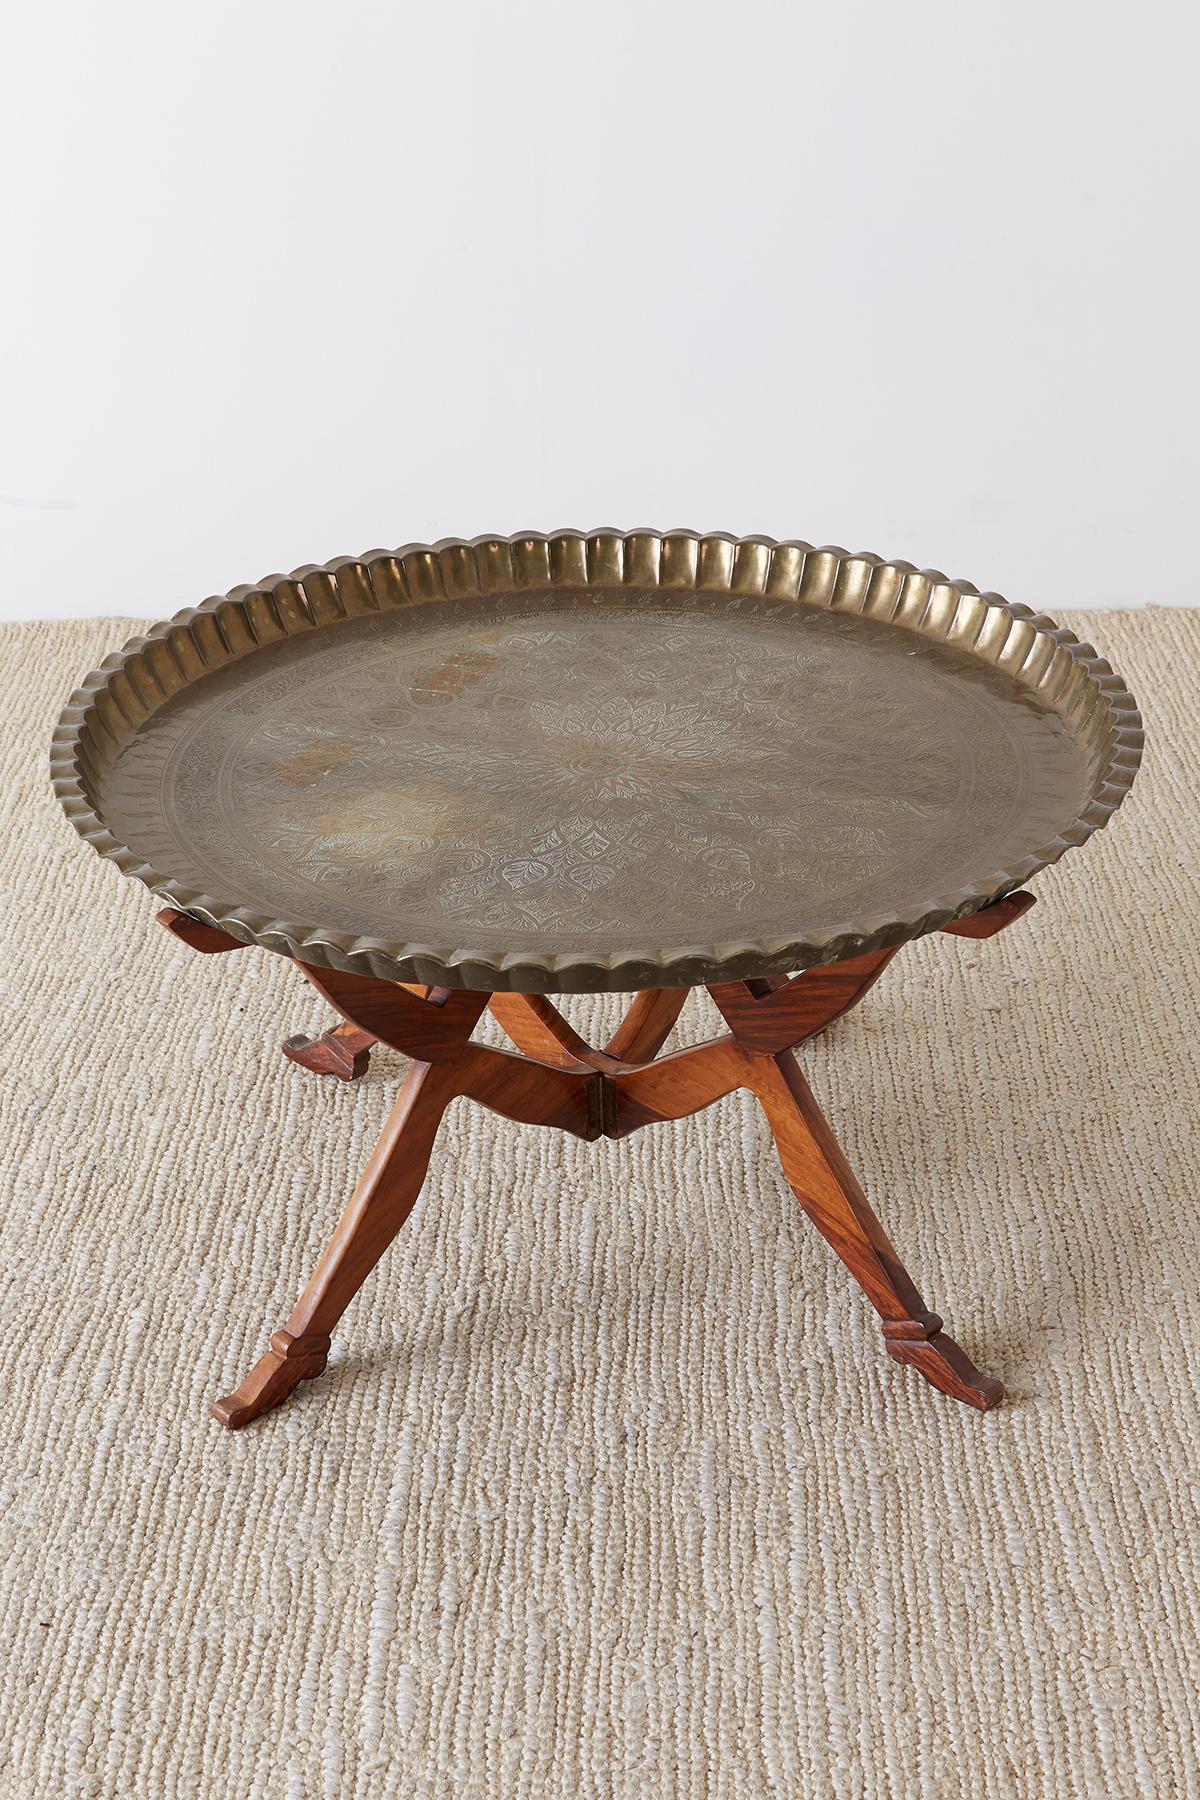 Mid-Century Modern Moroccan Brass Tray Table with Figural Arms and Legs